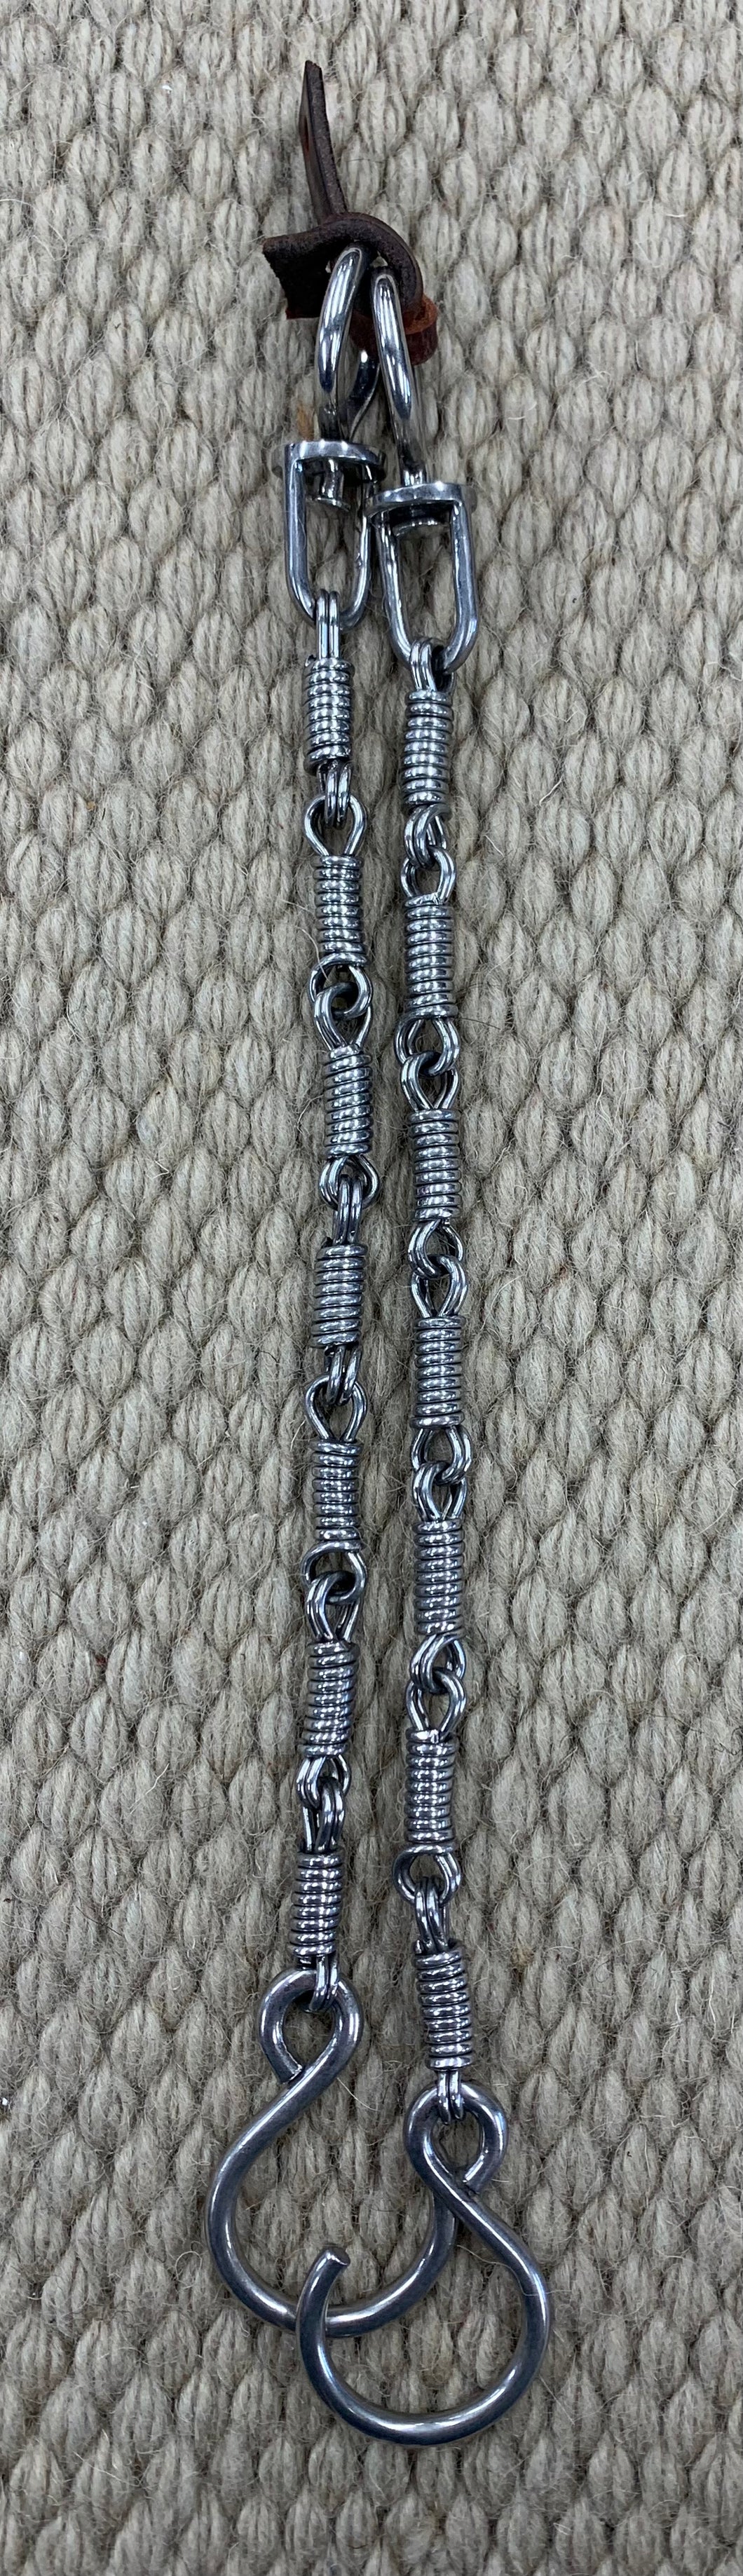 Rein Chains - RCH02 - Twisted Stainless